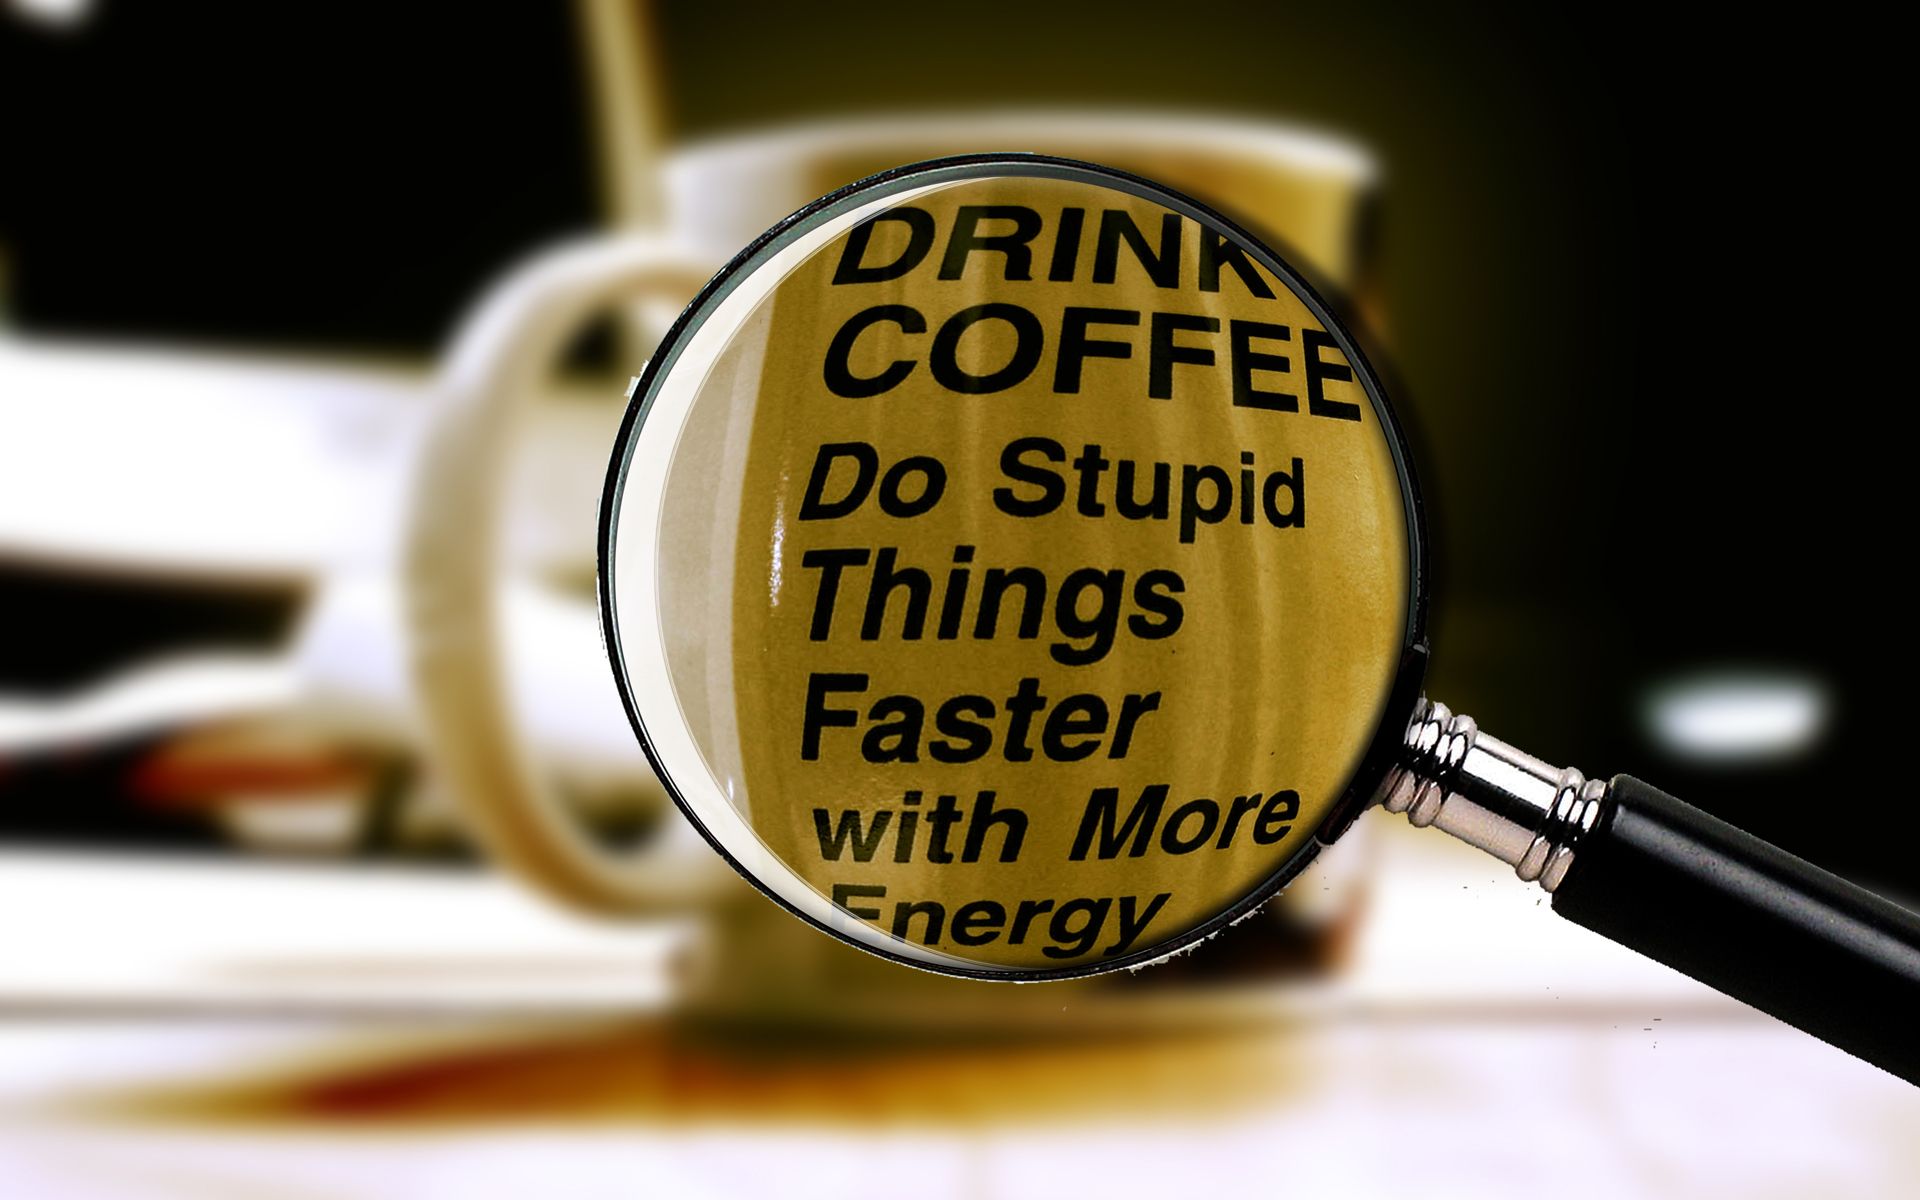 drink coffee do stupid things faster with more energy wallpaper